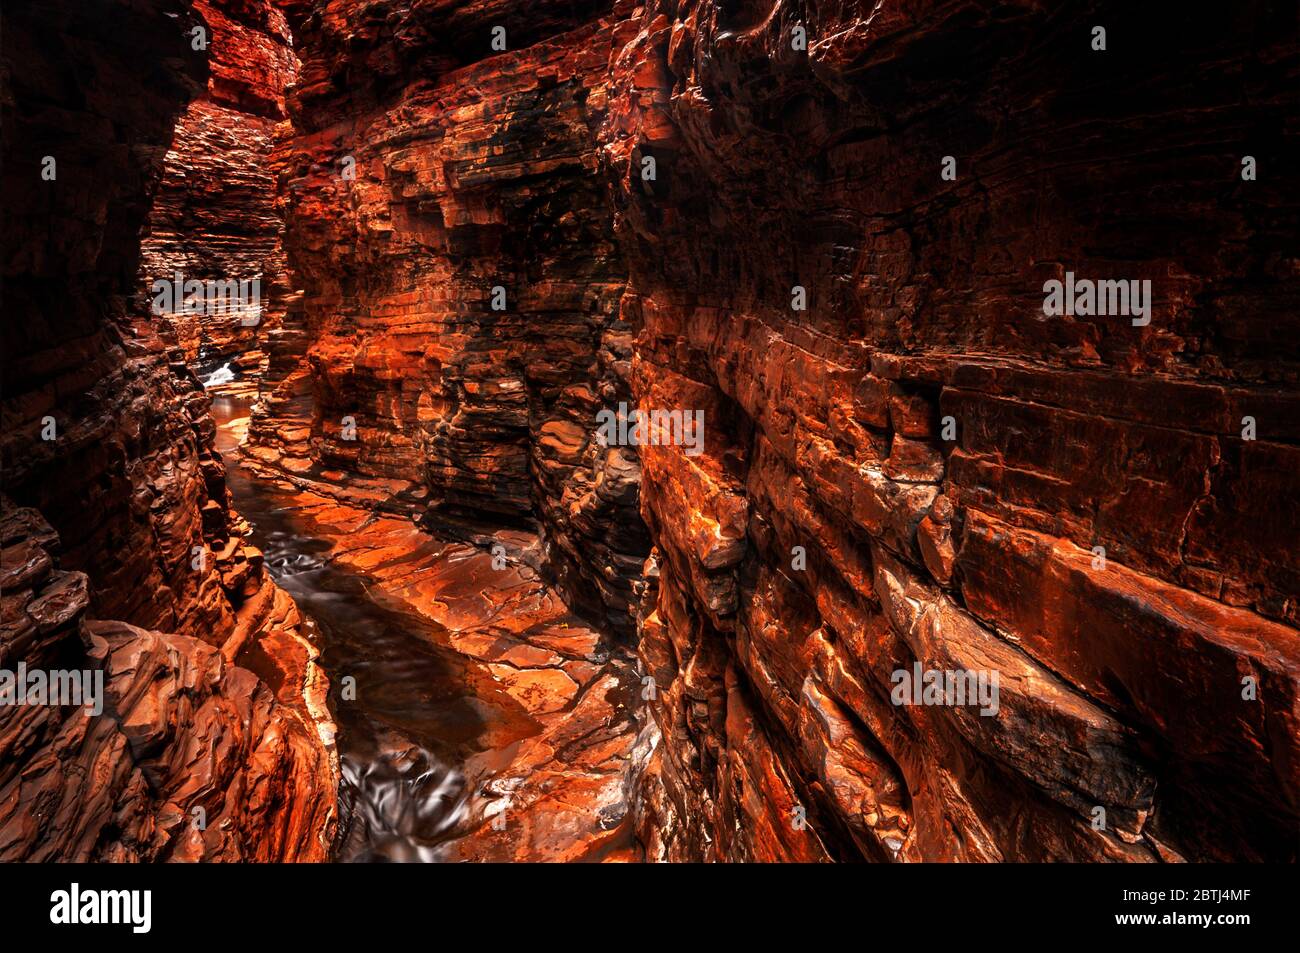 Amazing Weano Gorge glowing its typical red colour. Stock Photo